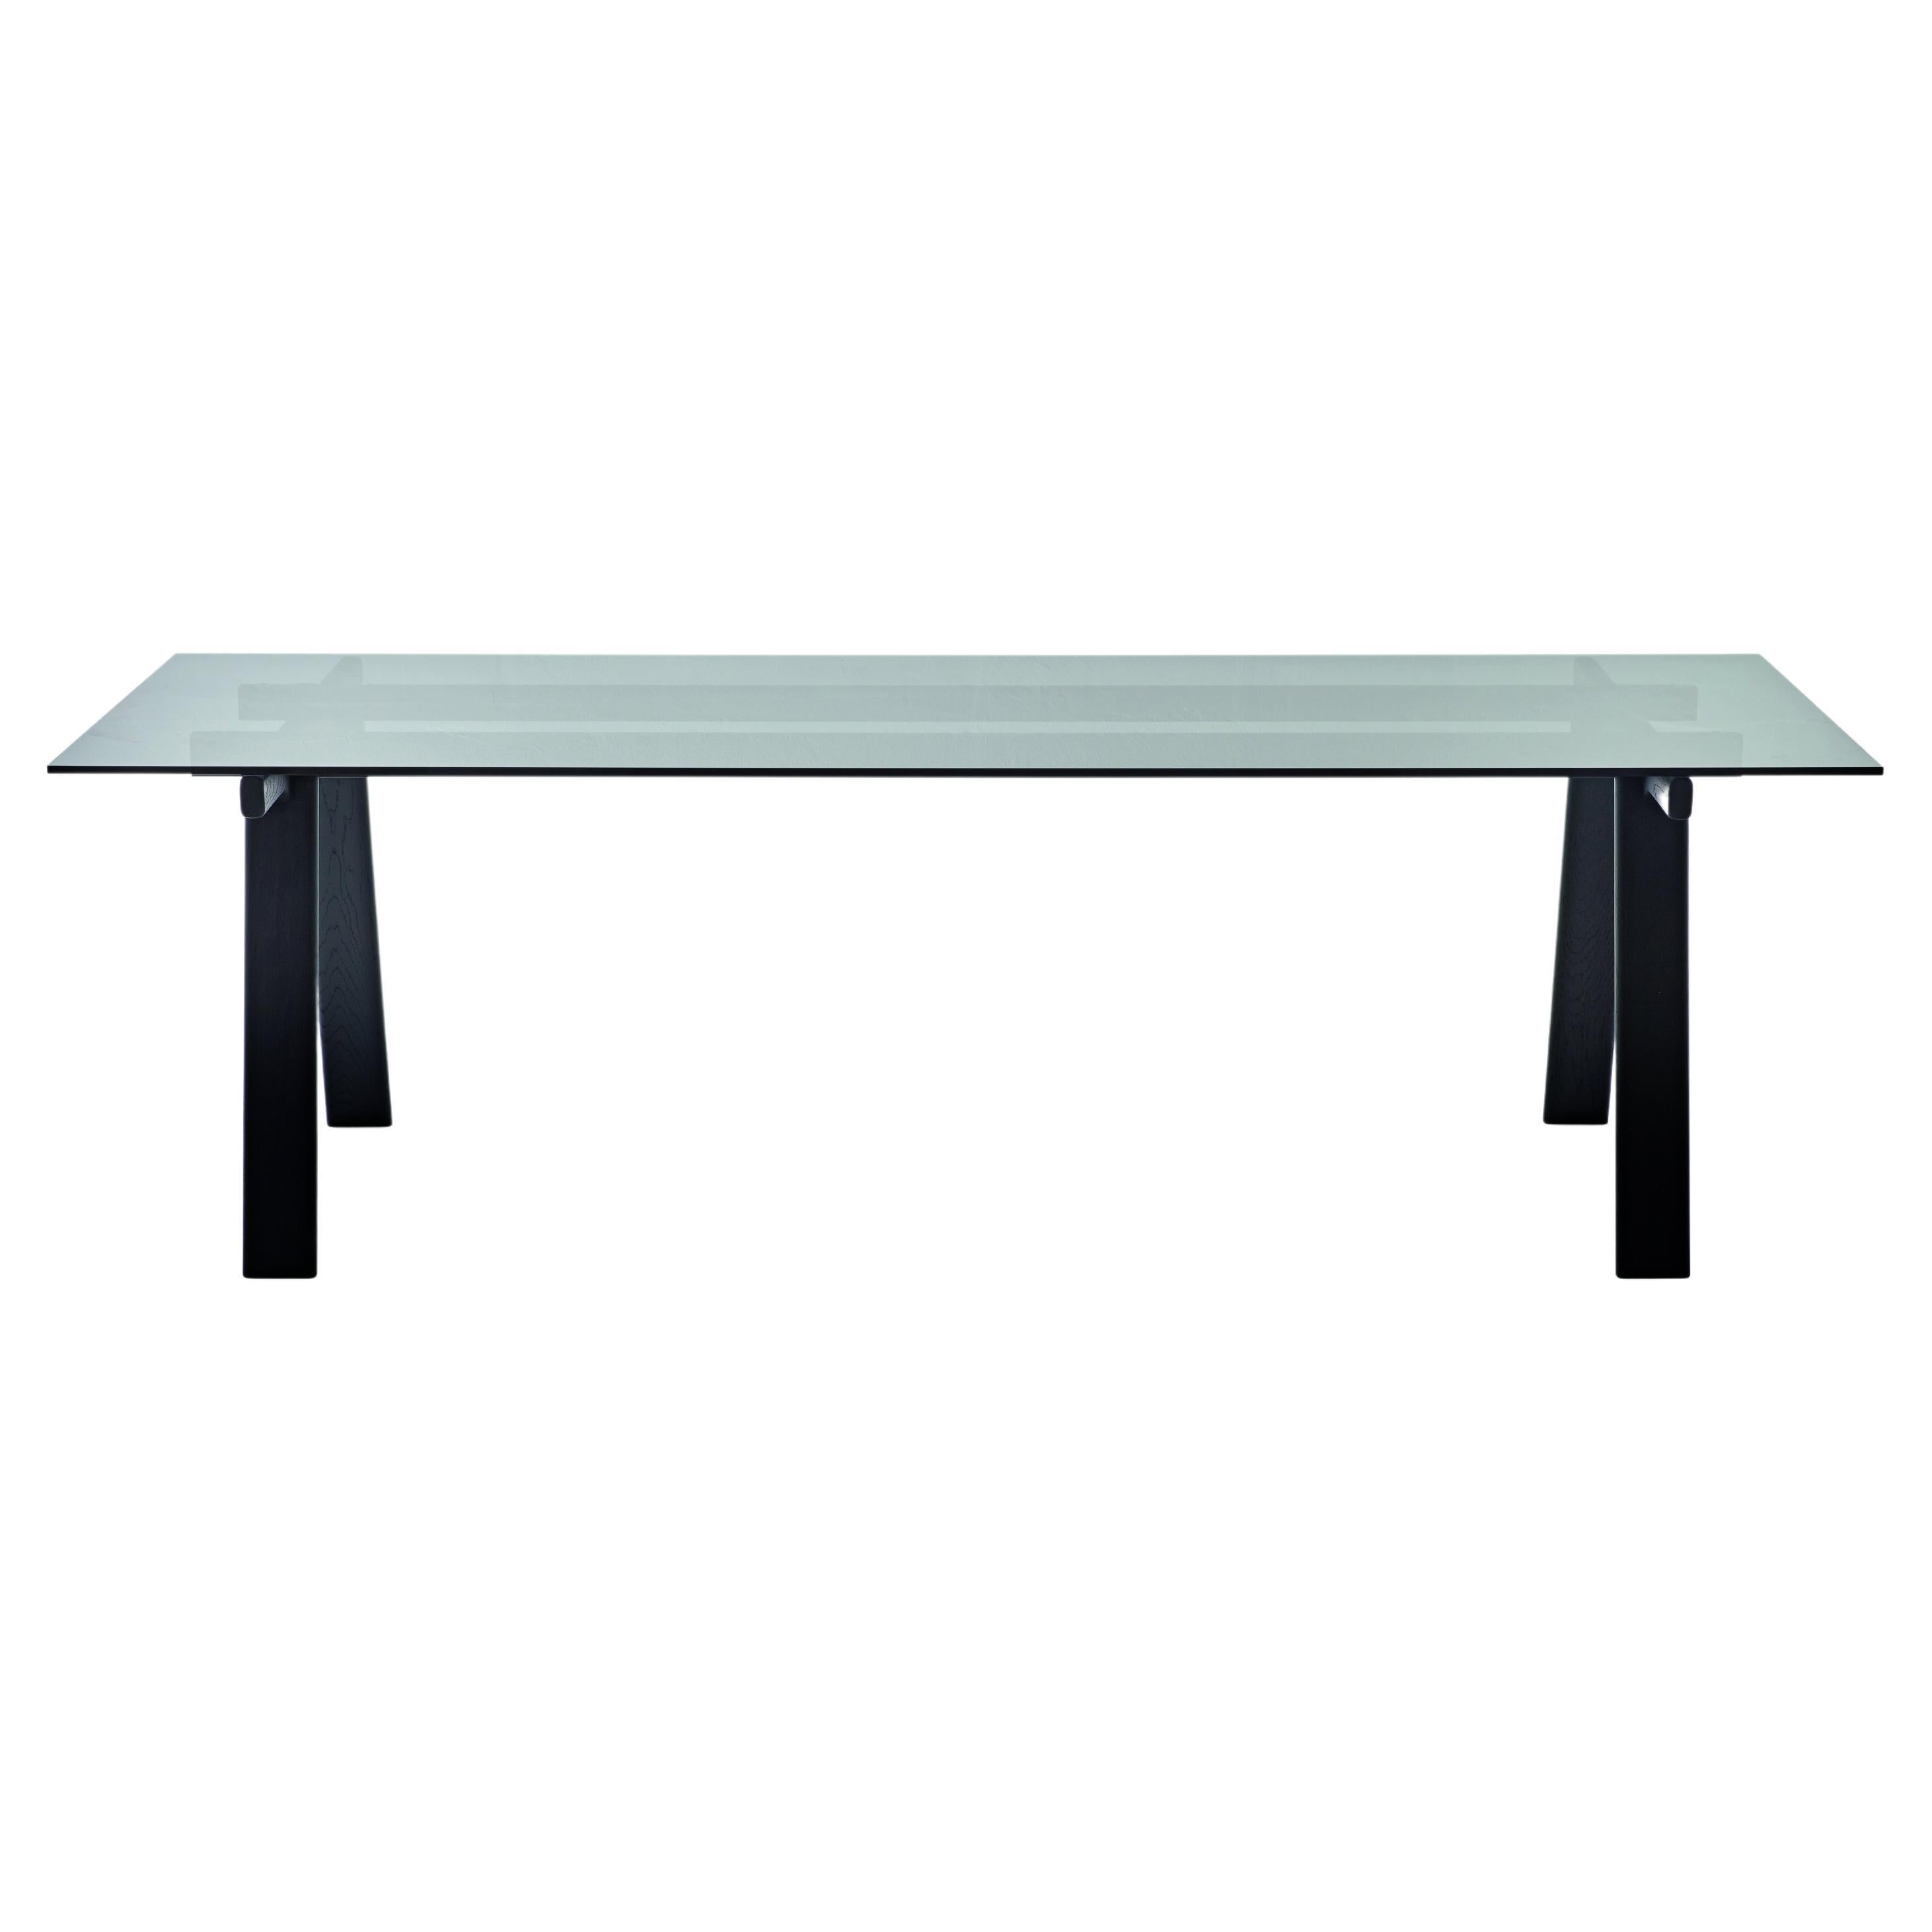 Zanotta Large Ambrosiano Table in Smoky Grey Glass with Black Frame by Mist-o